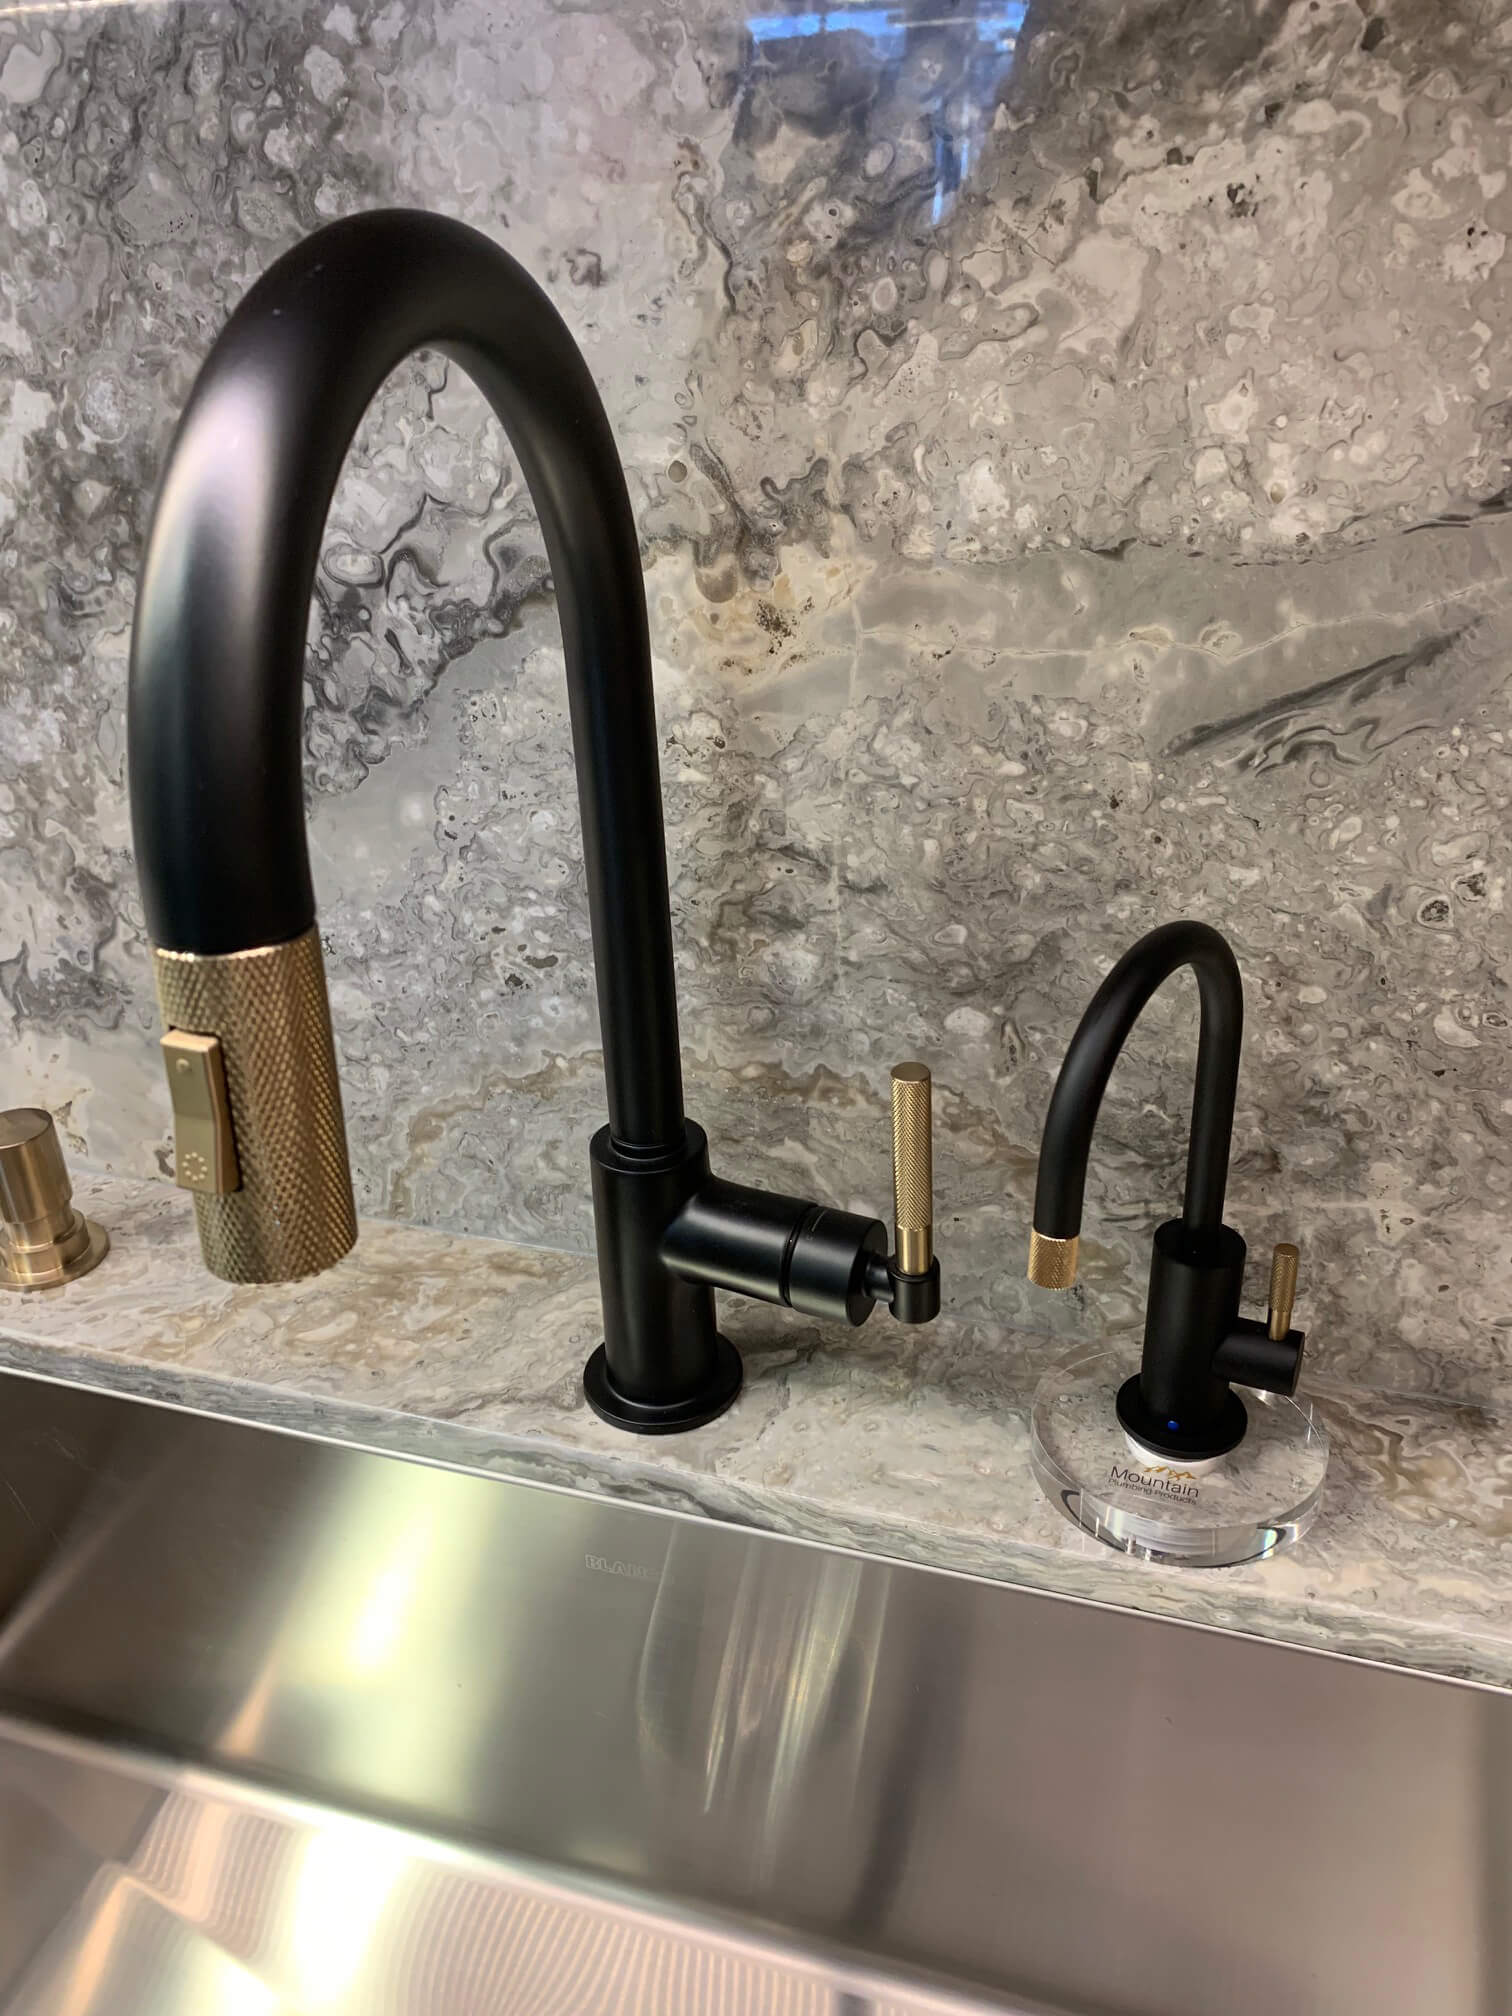 Pairing The Mt1843 Duet Knurled Faucet With Brizos Litze Kitchen Faucet Mountain Plumbing Products